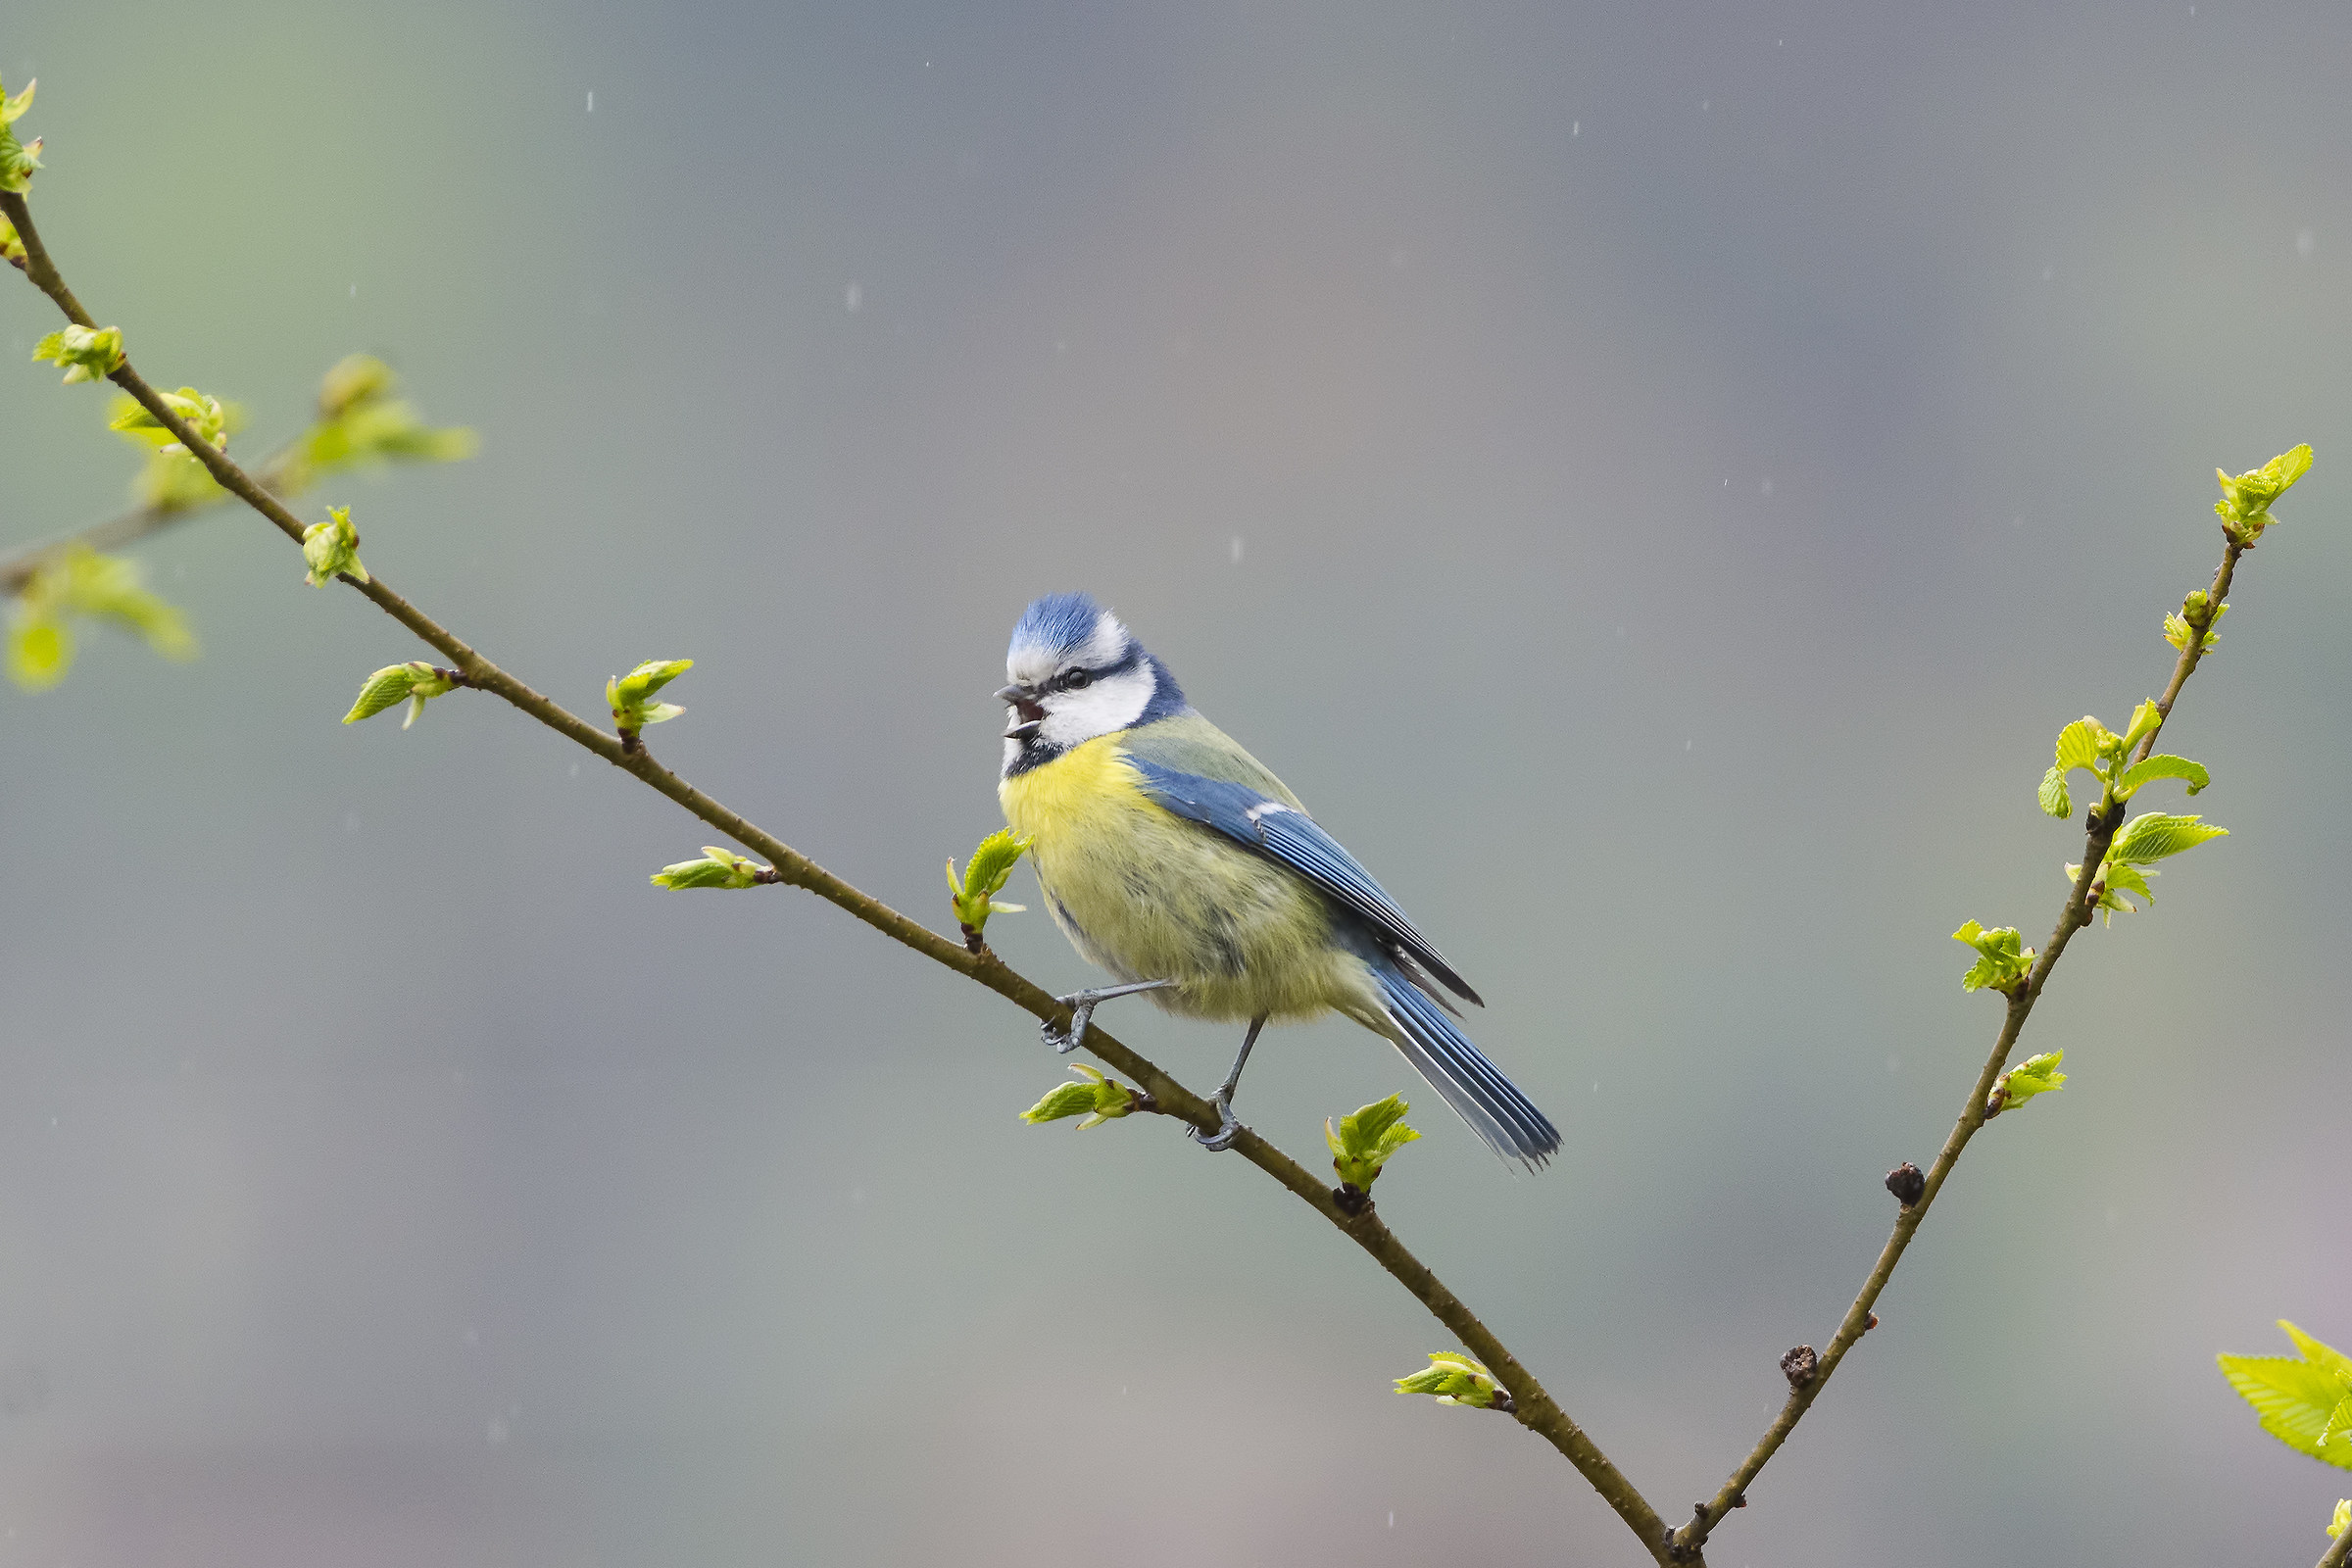 The blue tit and the drizzle...